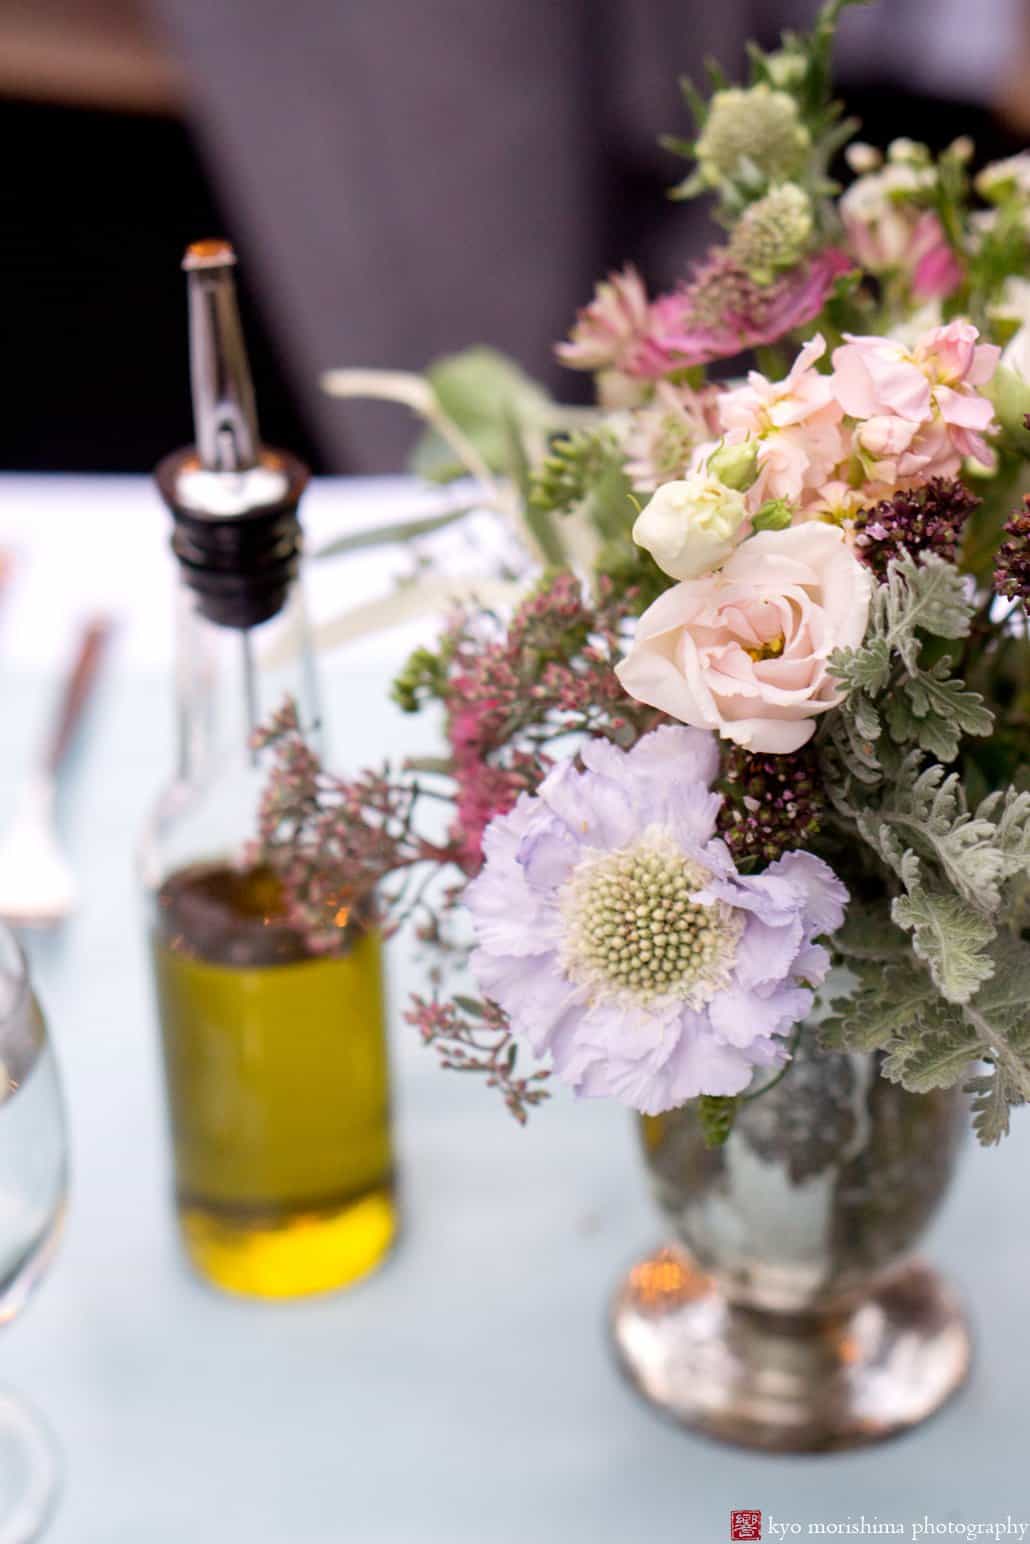 Olive oil next to a centerpiece by Opalia Flowers at Frankies 457 Spuntino wedding reception, photographed by Kyo Morishima